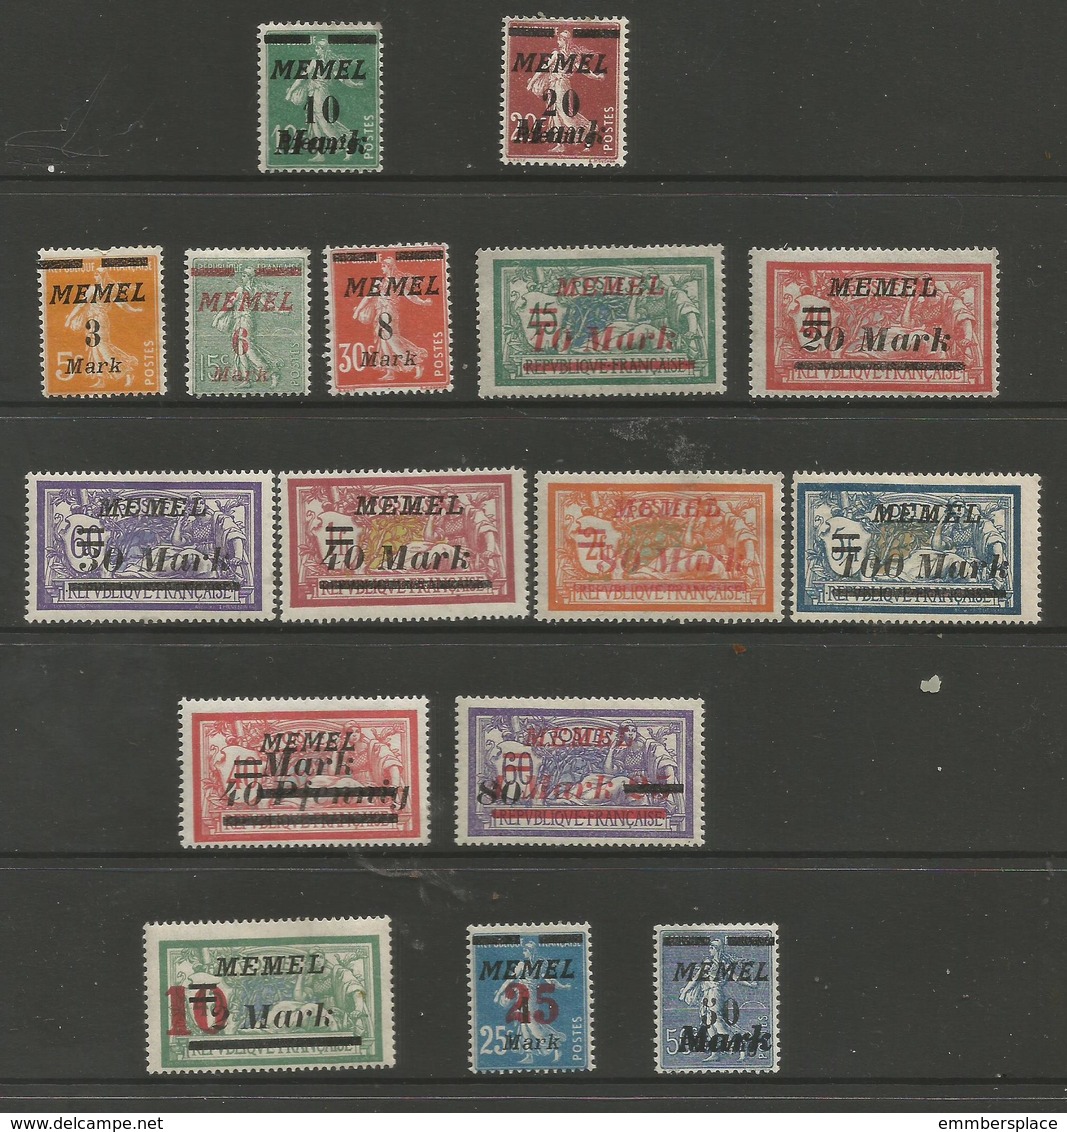 Memel (Klaipeda) - 1922 Sower/Merson Surcharges (October 1922 - January 1923 Issues) - Unused Stamps